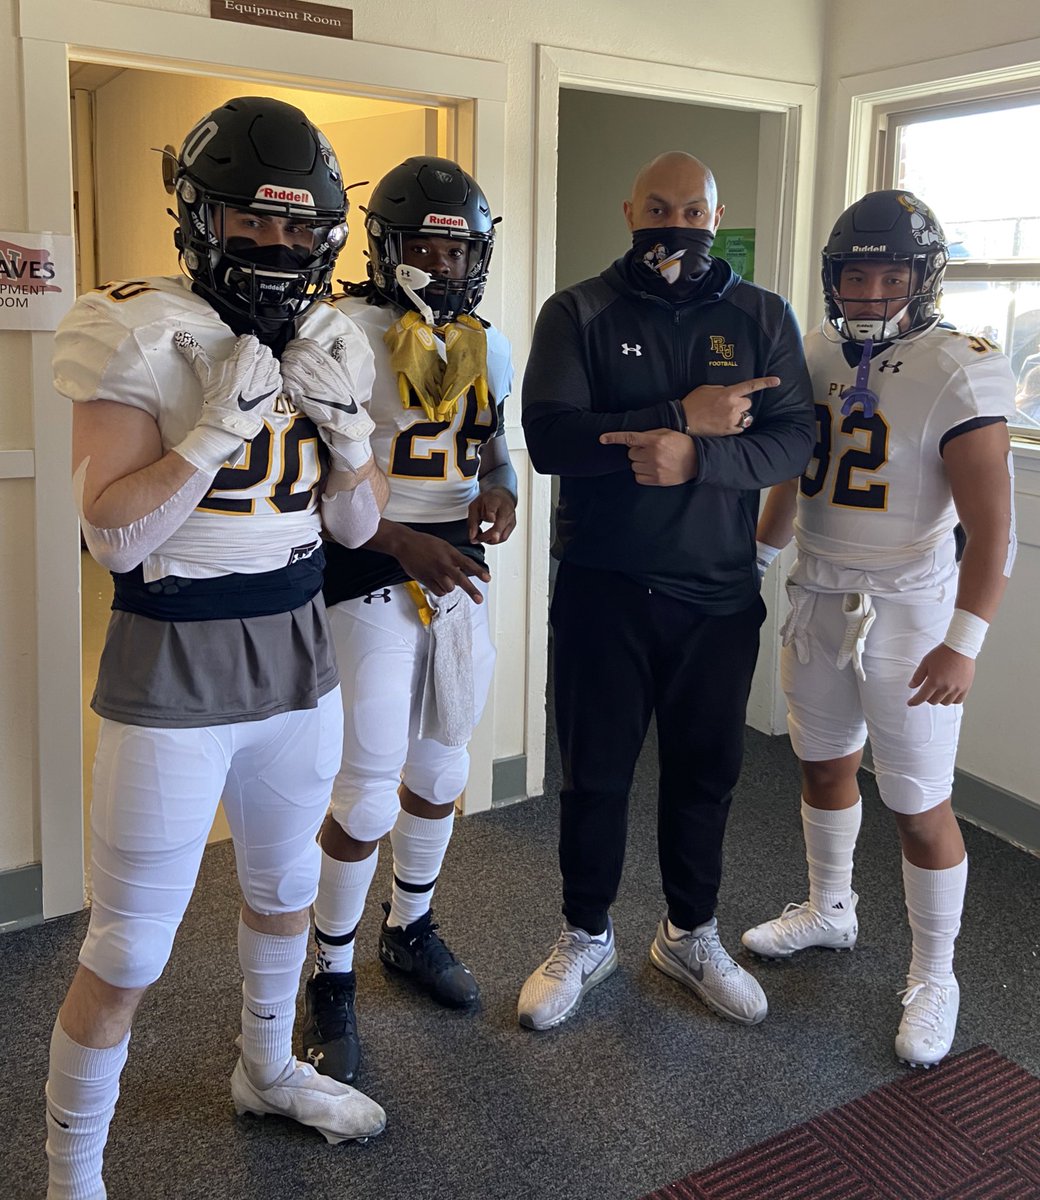 It’s been a great ride with these 2 senior Running Backs, Cody & Malik. Proud of their productivity in the mist of Covid-19 which truly changed the direction of their last season as Lutes. It’s be a pleasure servicing you as your Coach. #AllFuel #MoveTheCrowd #GoLutes